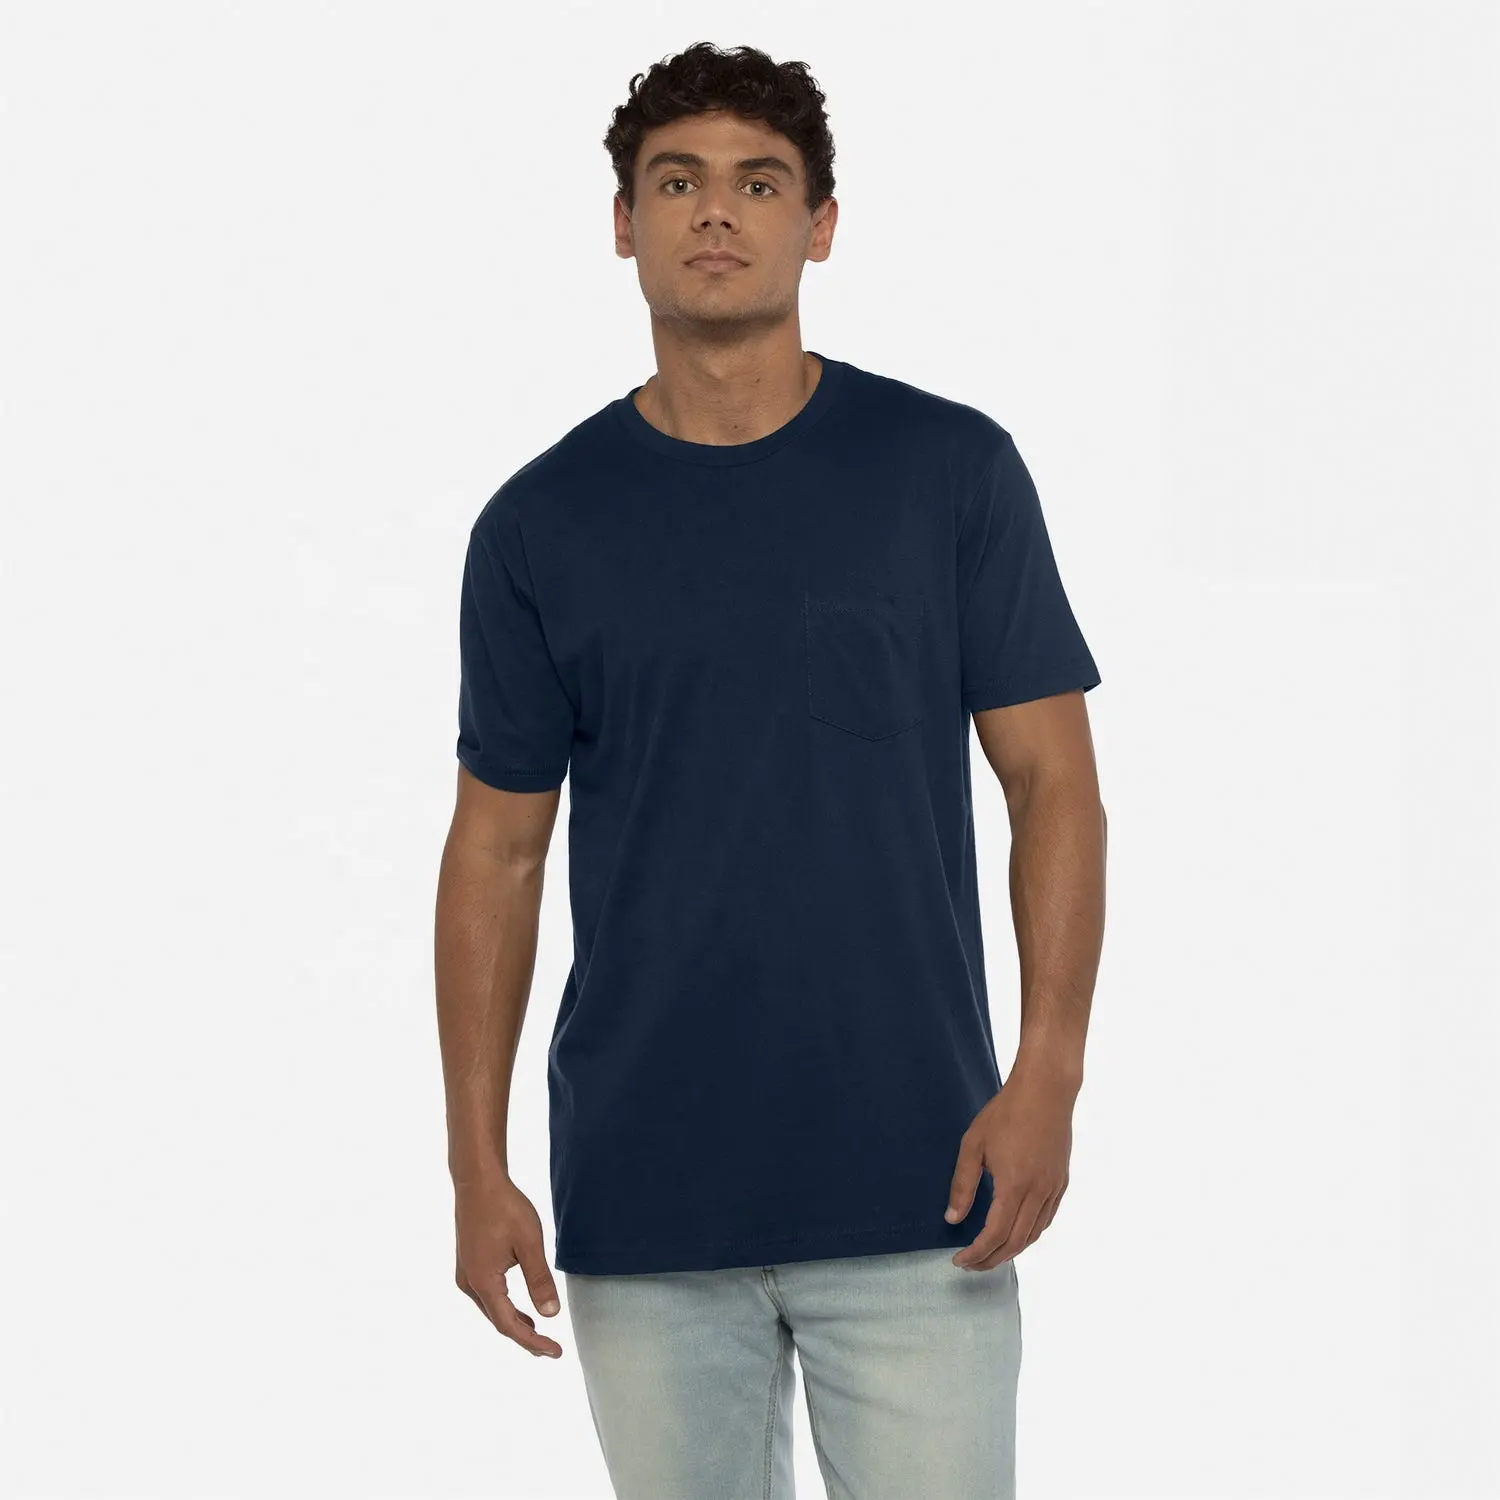 Next Level Apparel 3605 Style Midnight Navy Unisex Cotton Pocket T-Shirt Breathable Unisex Cotton Pocket Tee with your own logo